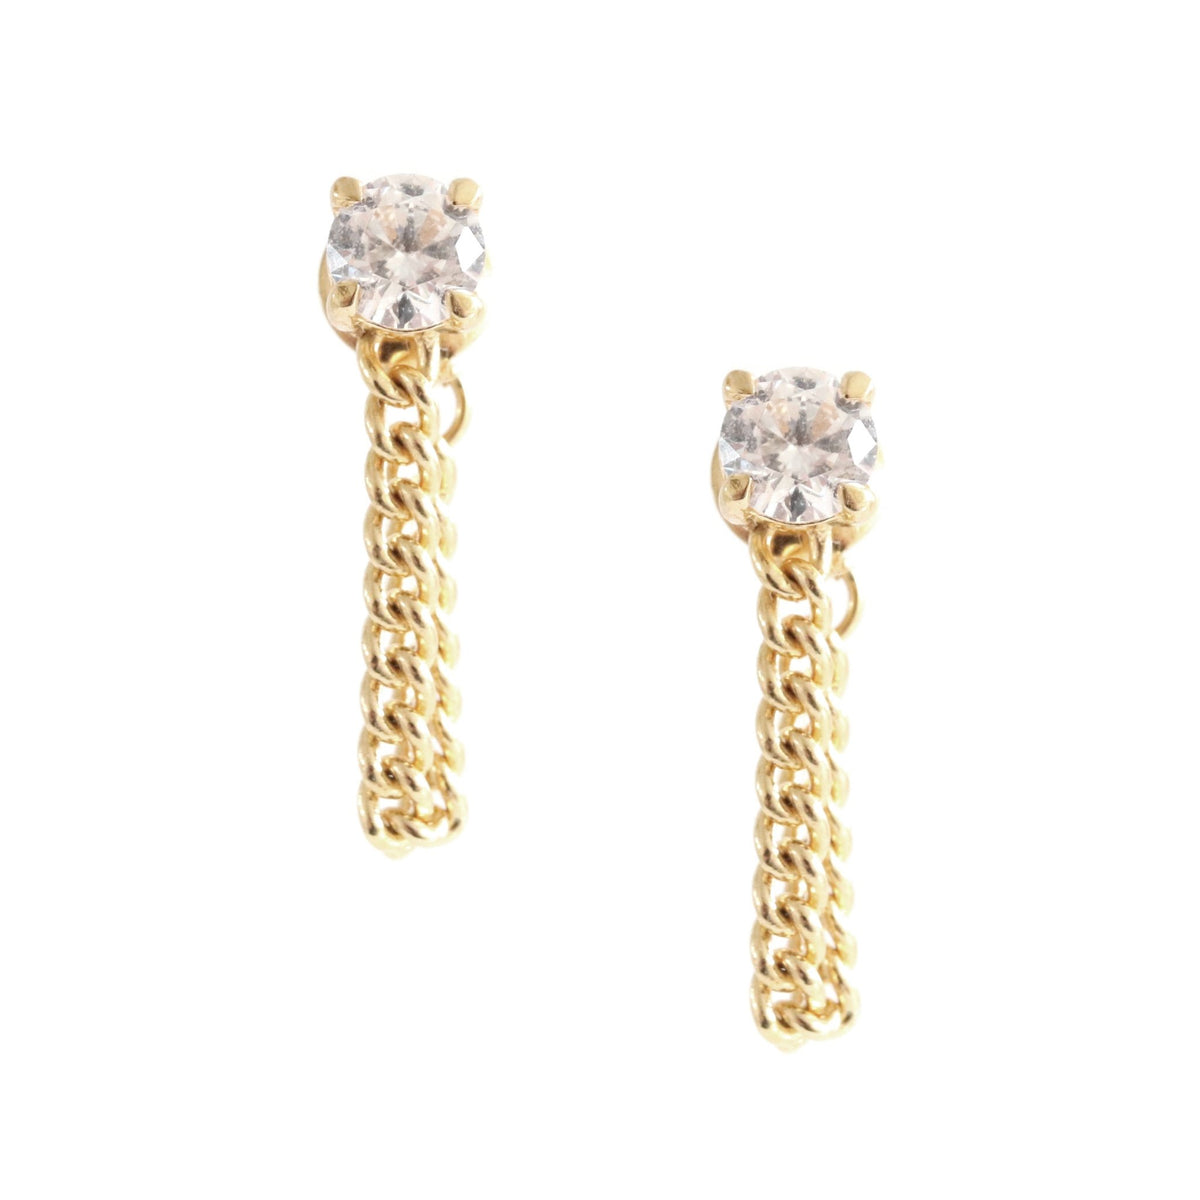 LOVE CABLE LINK CHAIN EARRINGS - CUBIC ZIRCONIA &amp; GOLD - SO PRETTY CARA COTTER